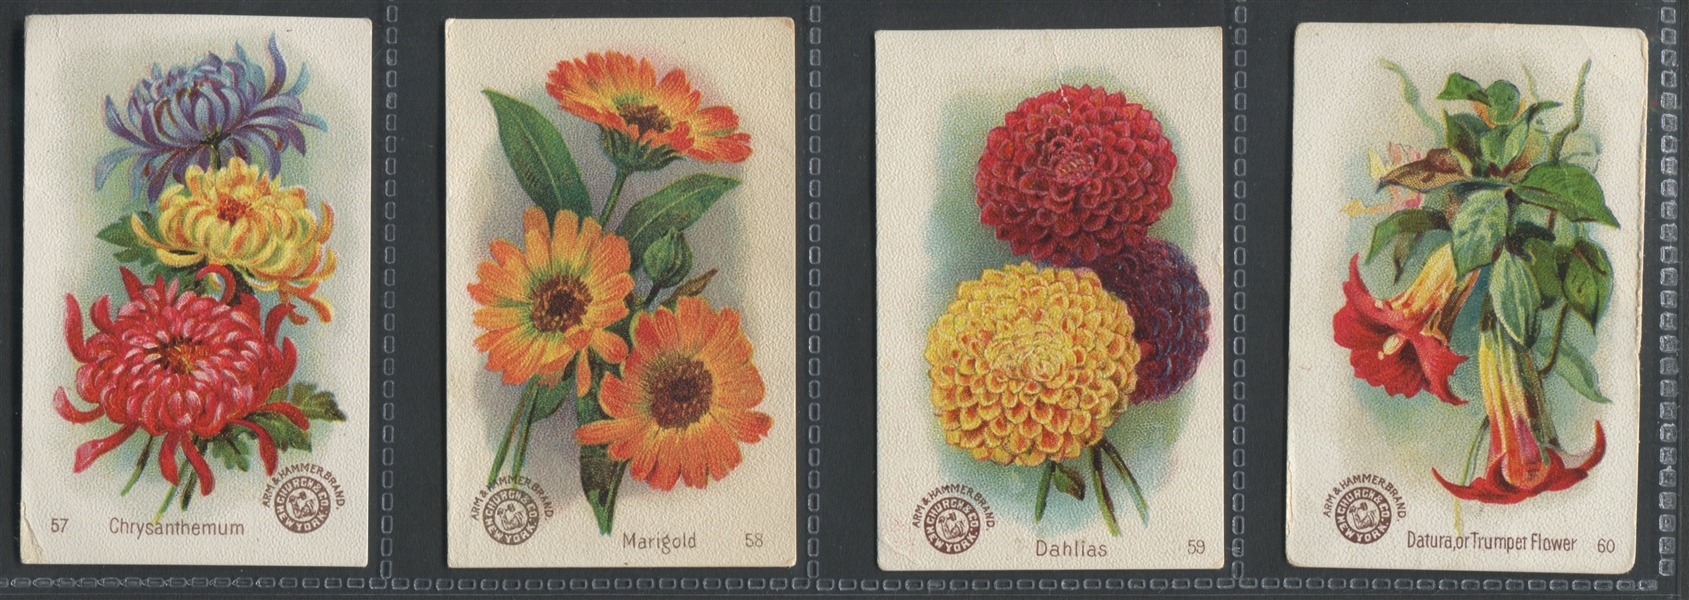 J16 Church & Dwight Beautiful Flowers Complete Set of (60) Cards